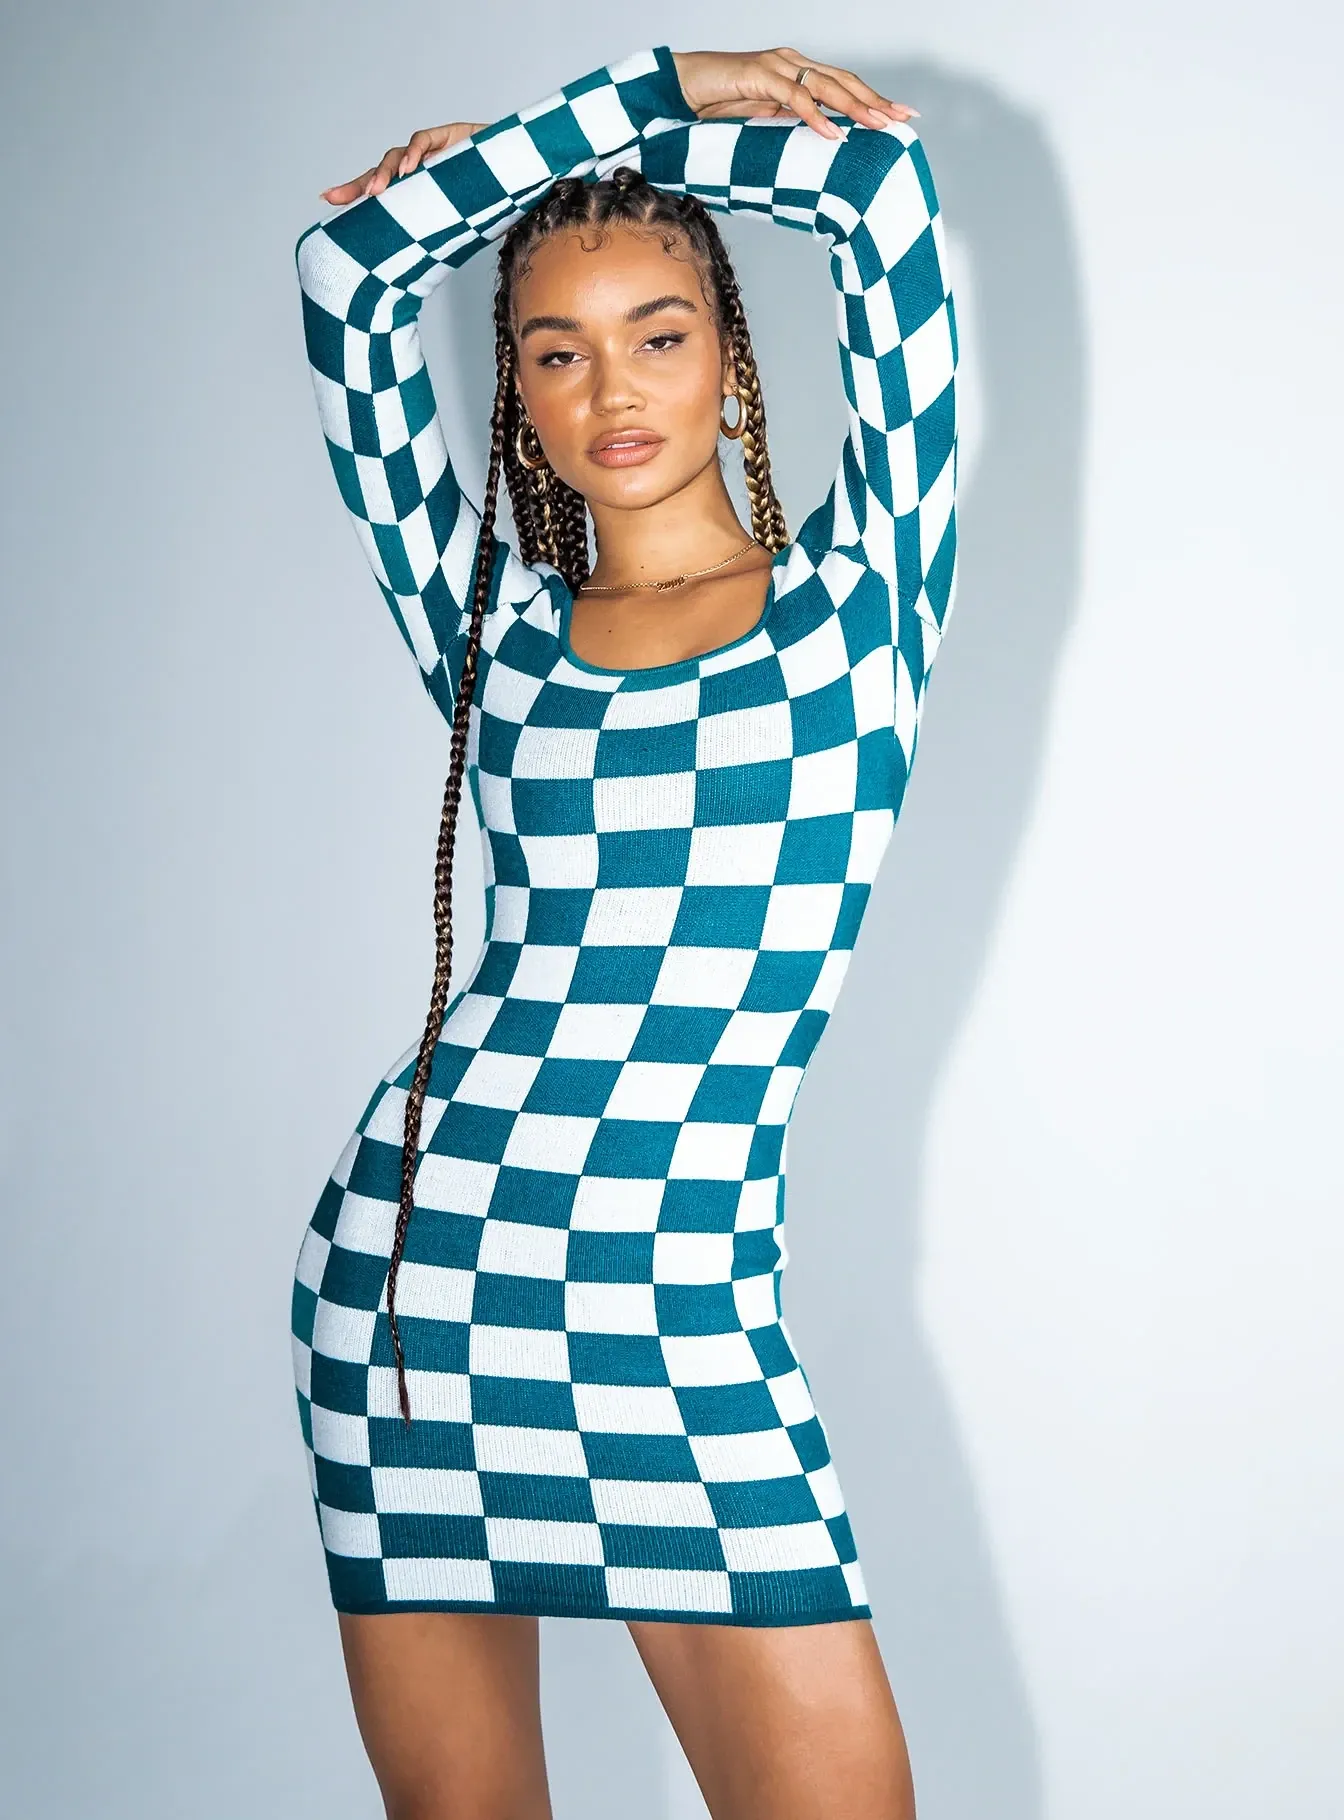 What do we think of the checker trend for the new year? Just